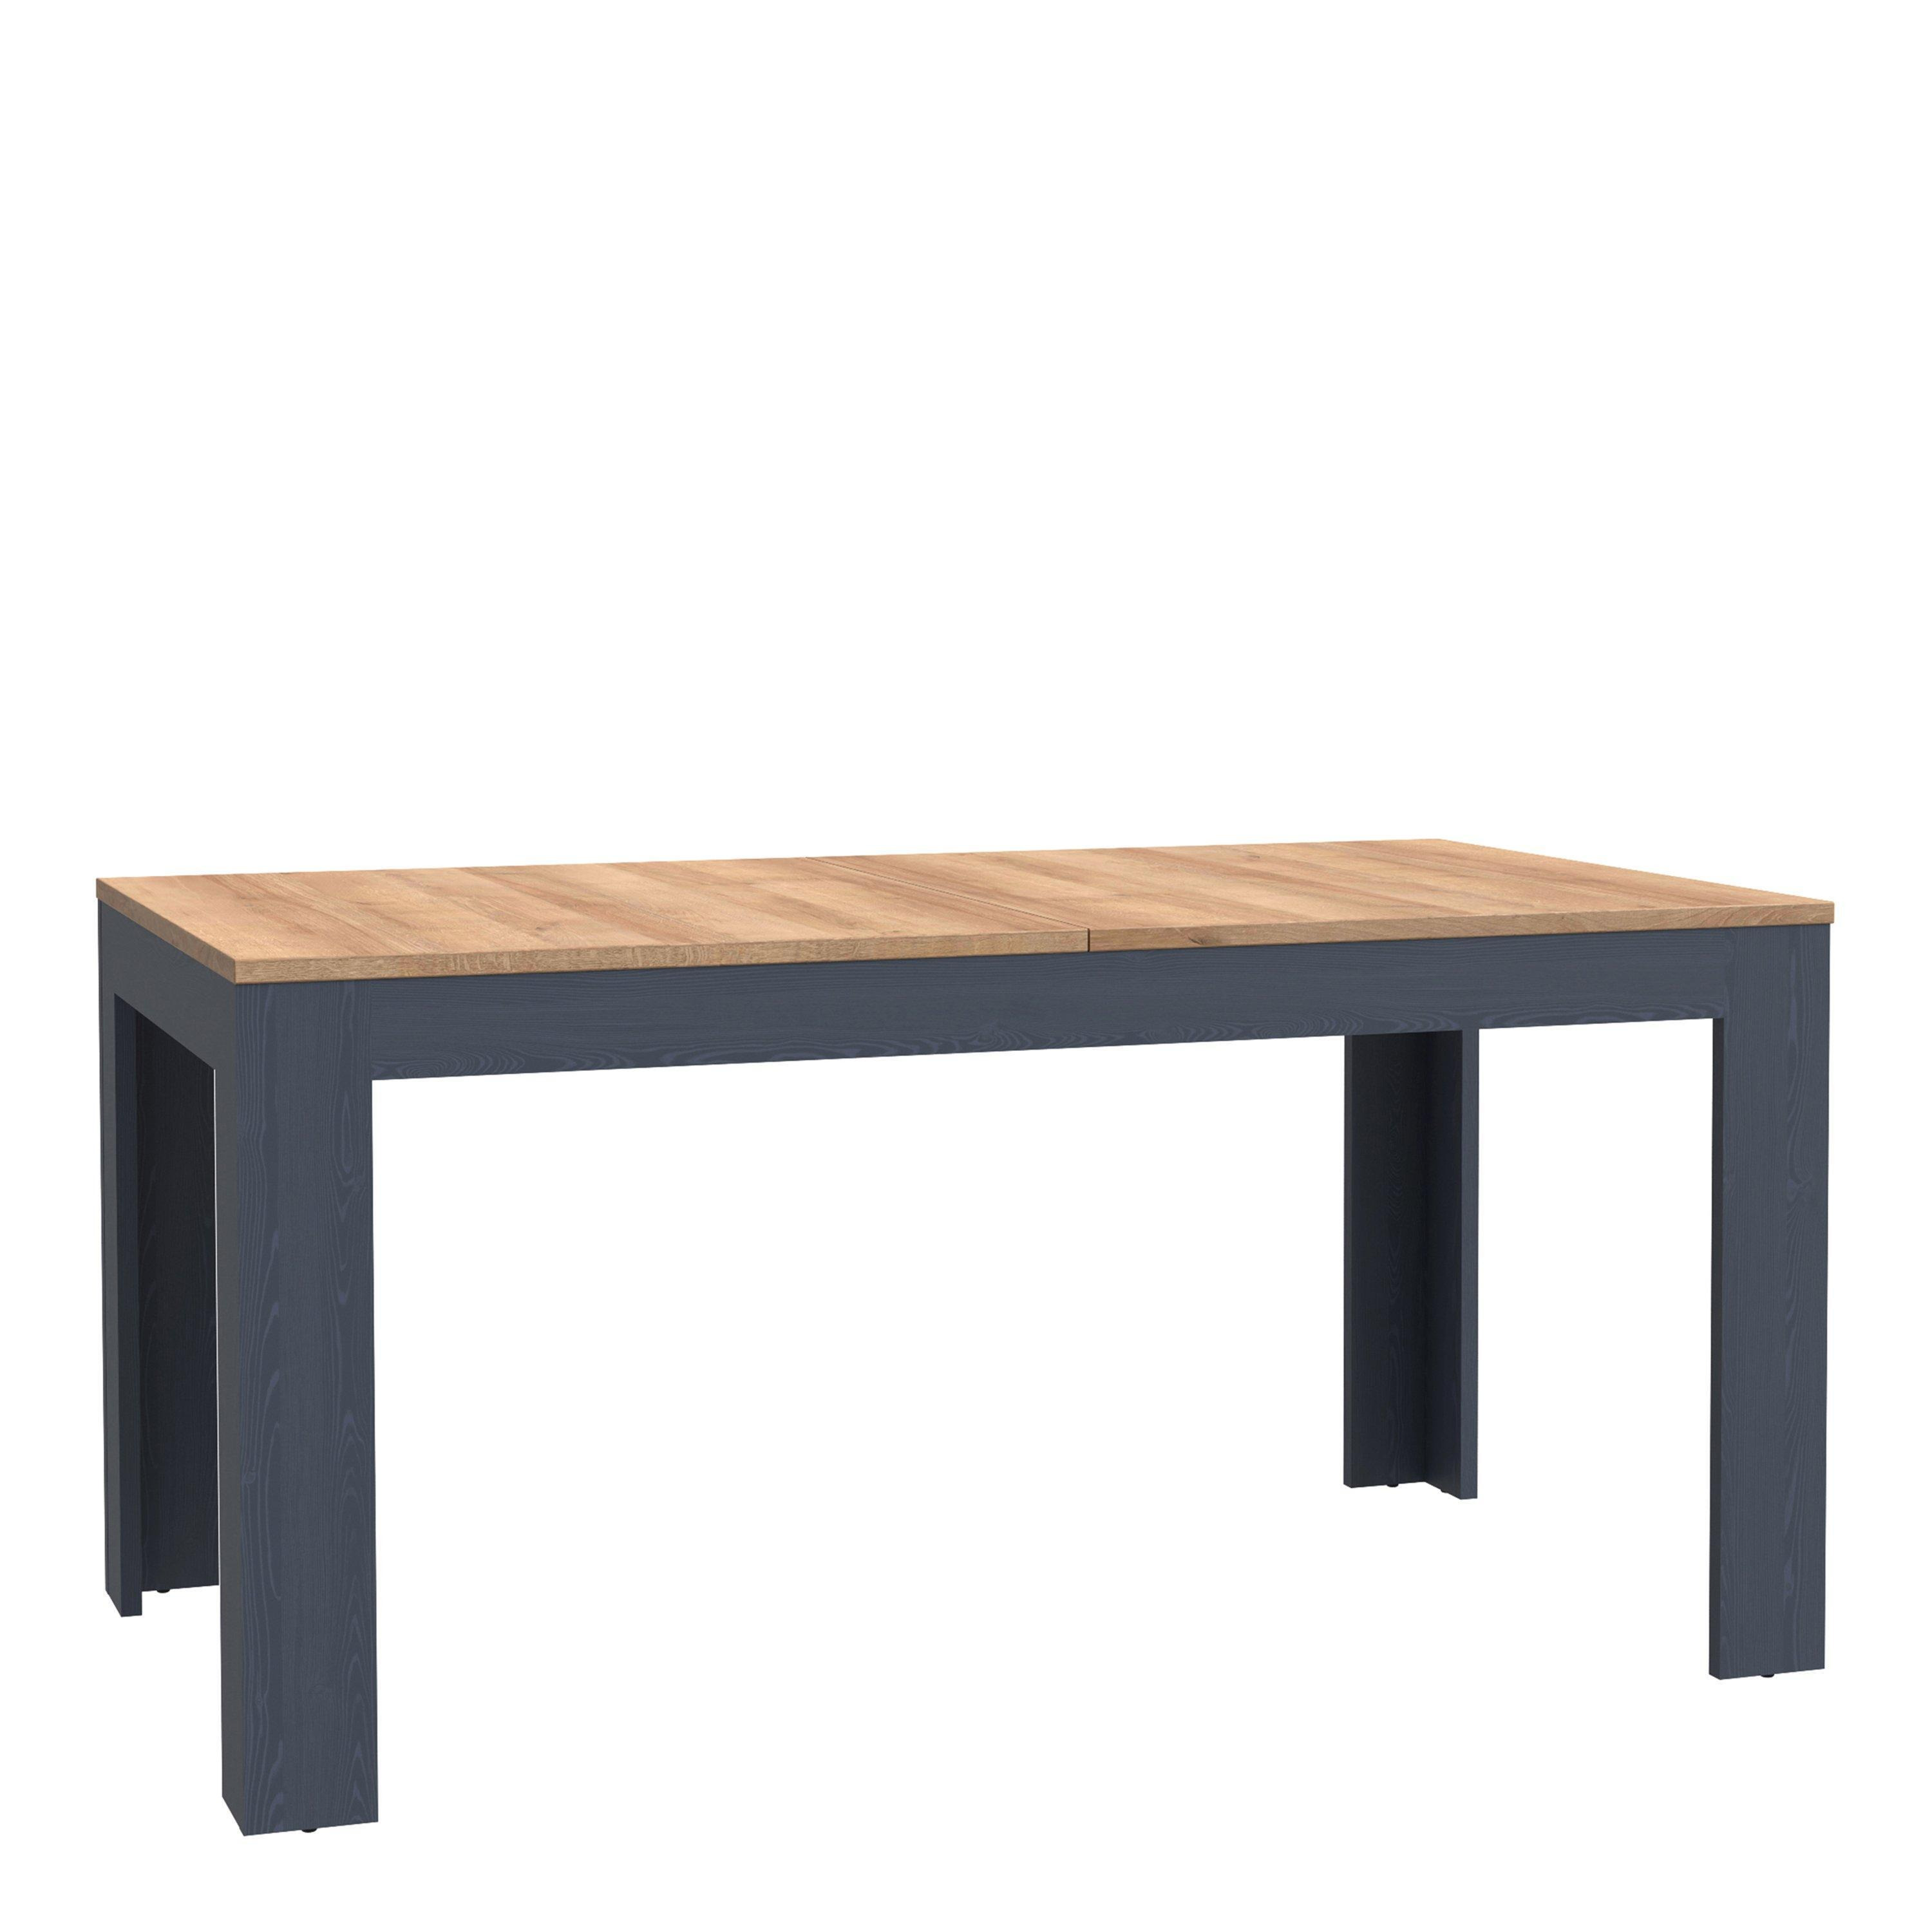 Bohol Extending Dining Table - image 1